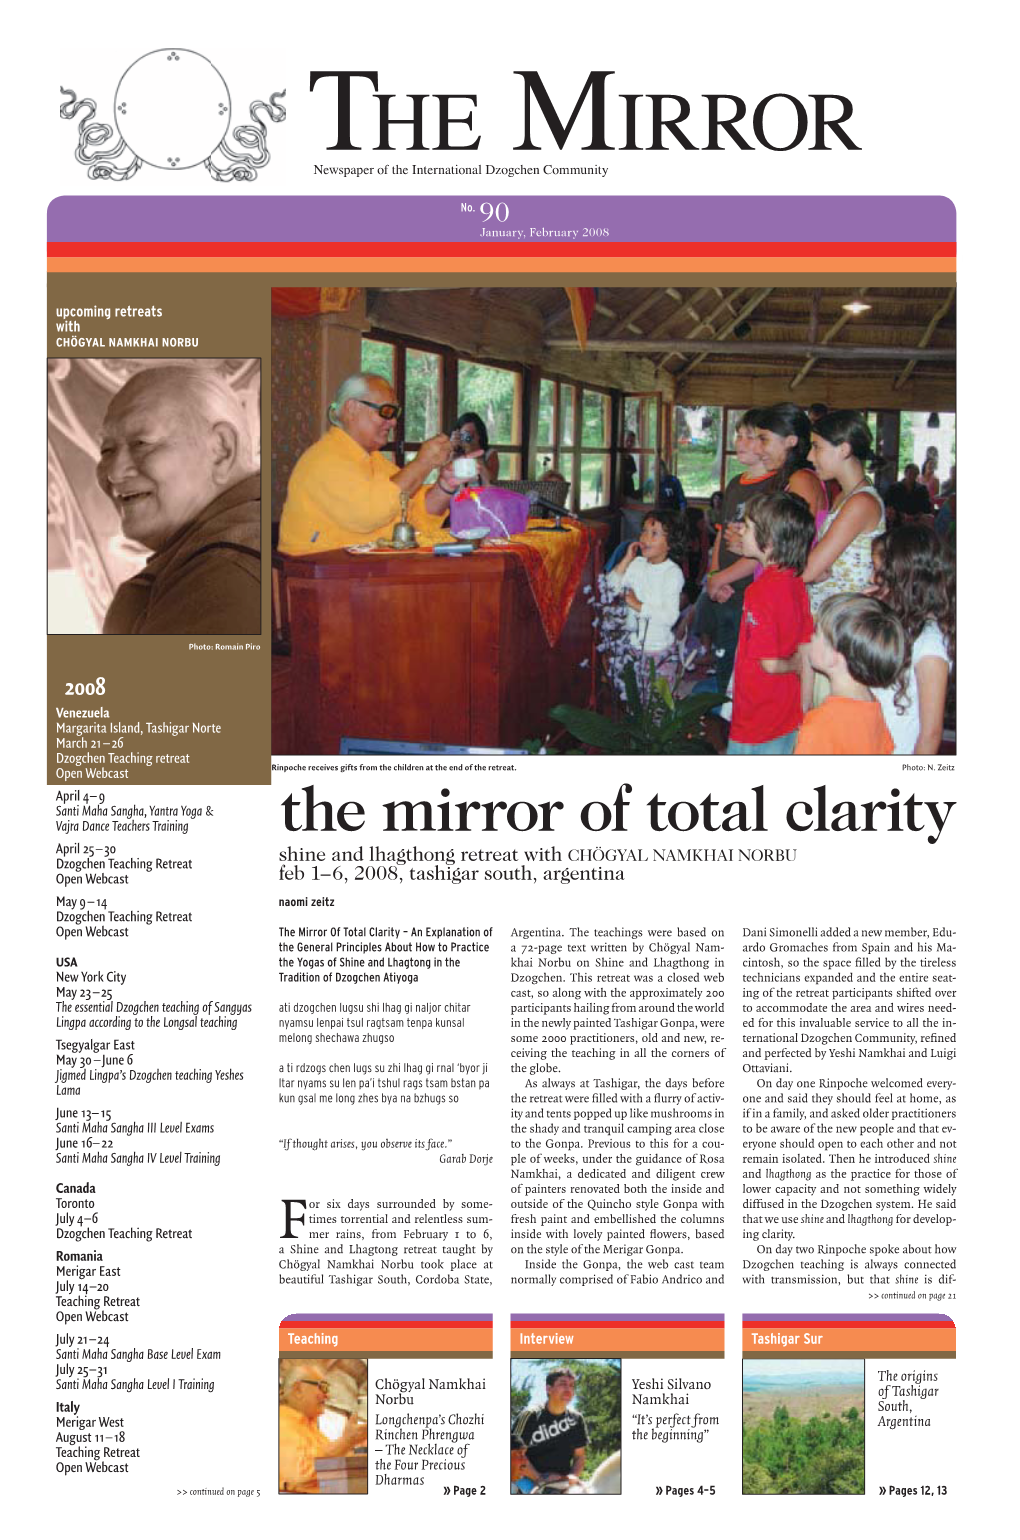 The Mirror of Total Clarity